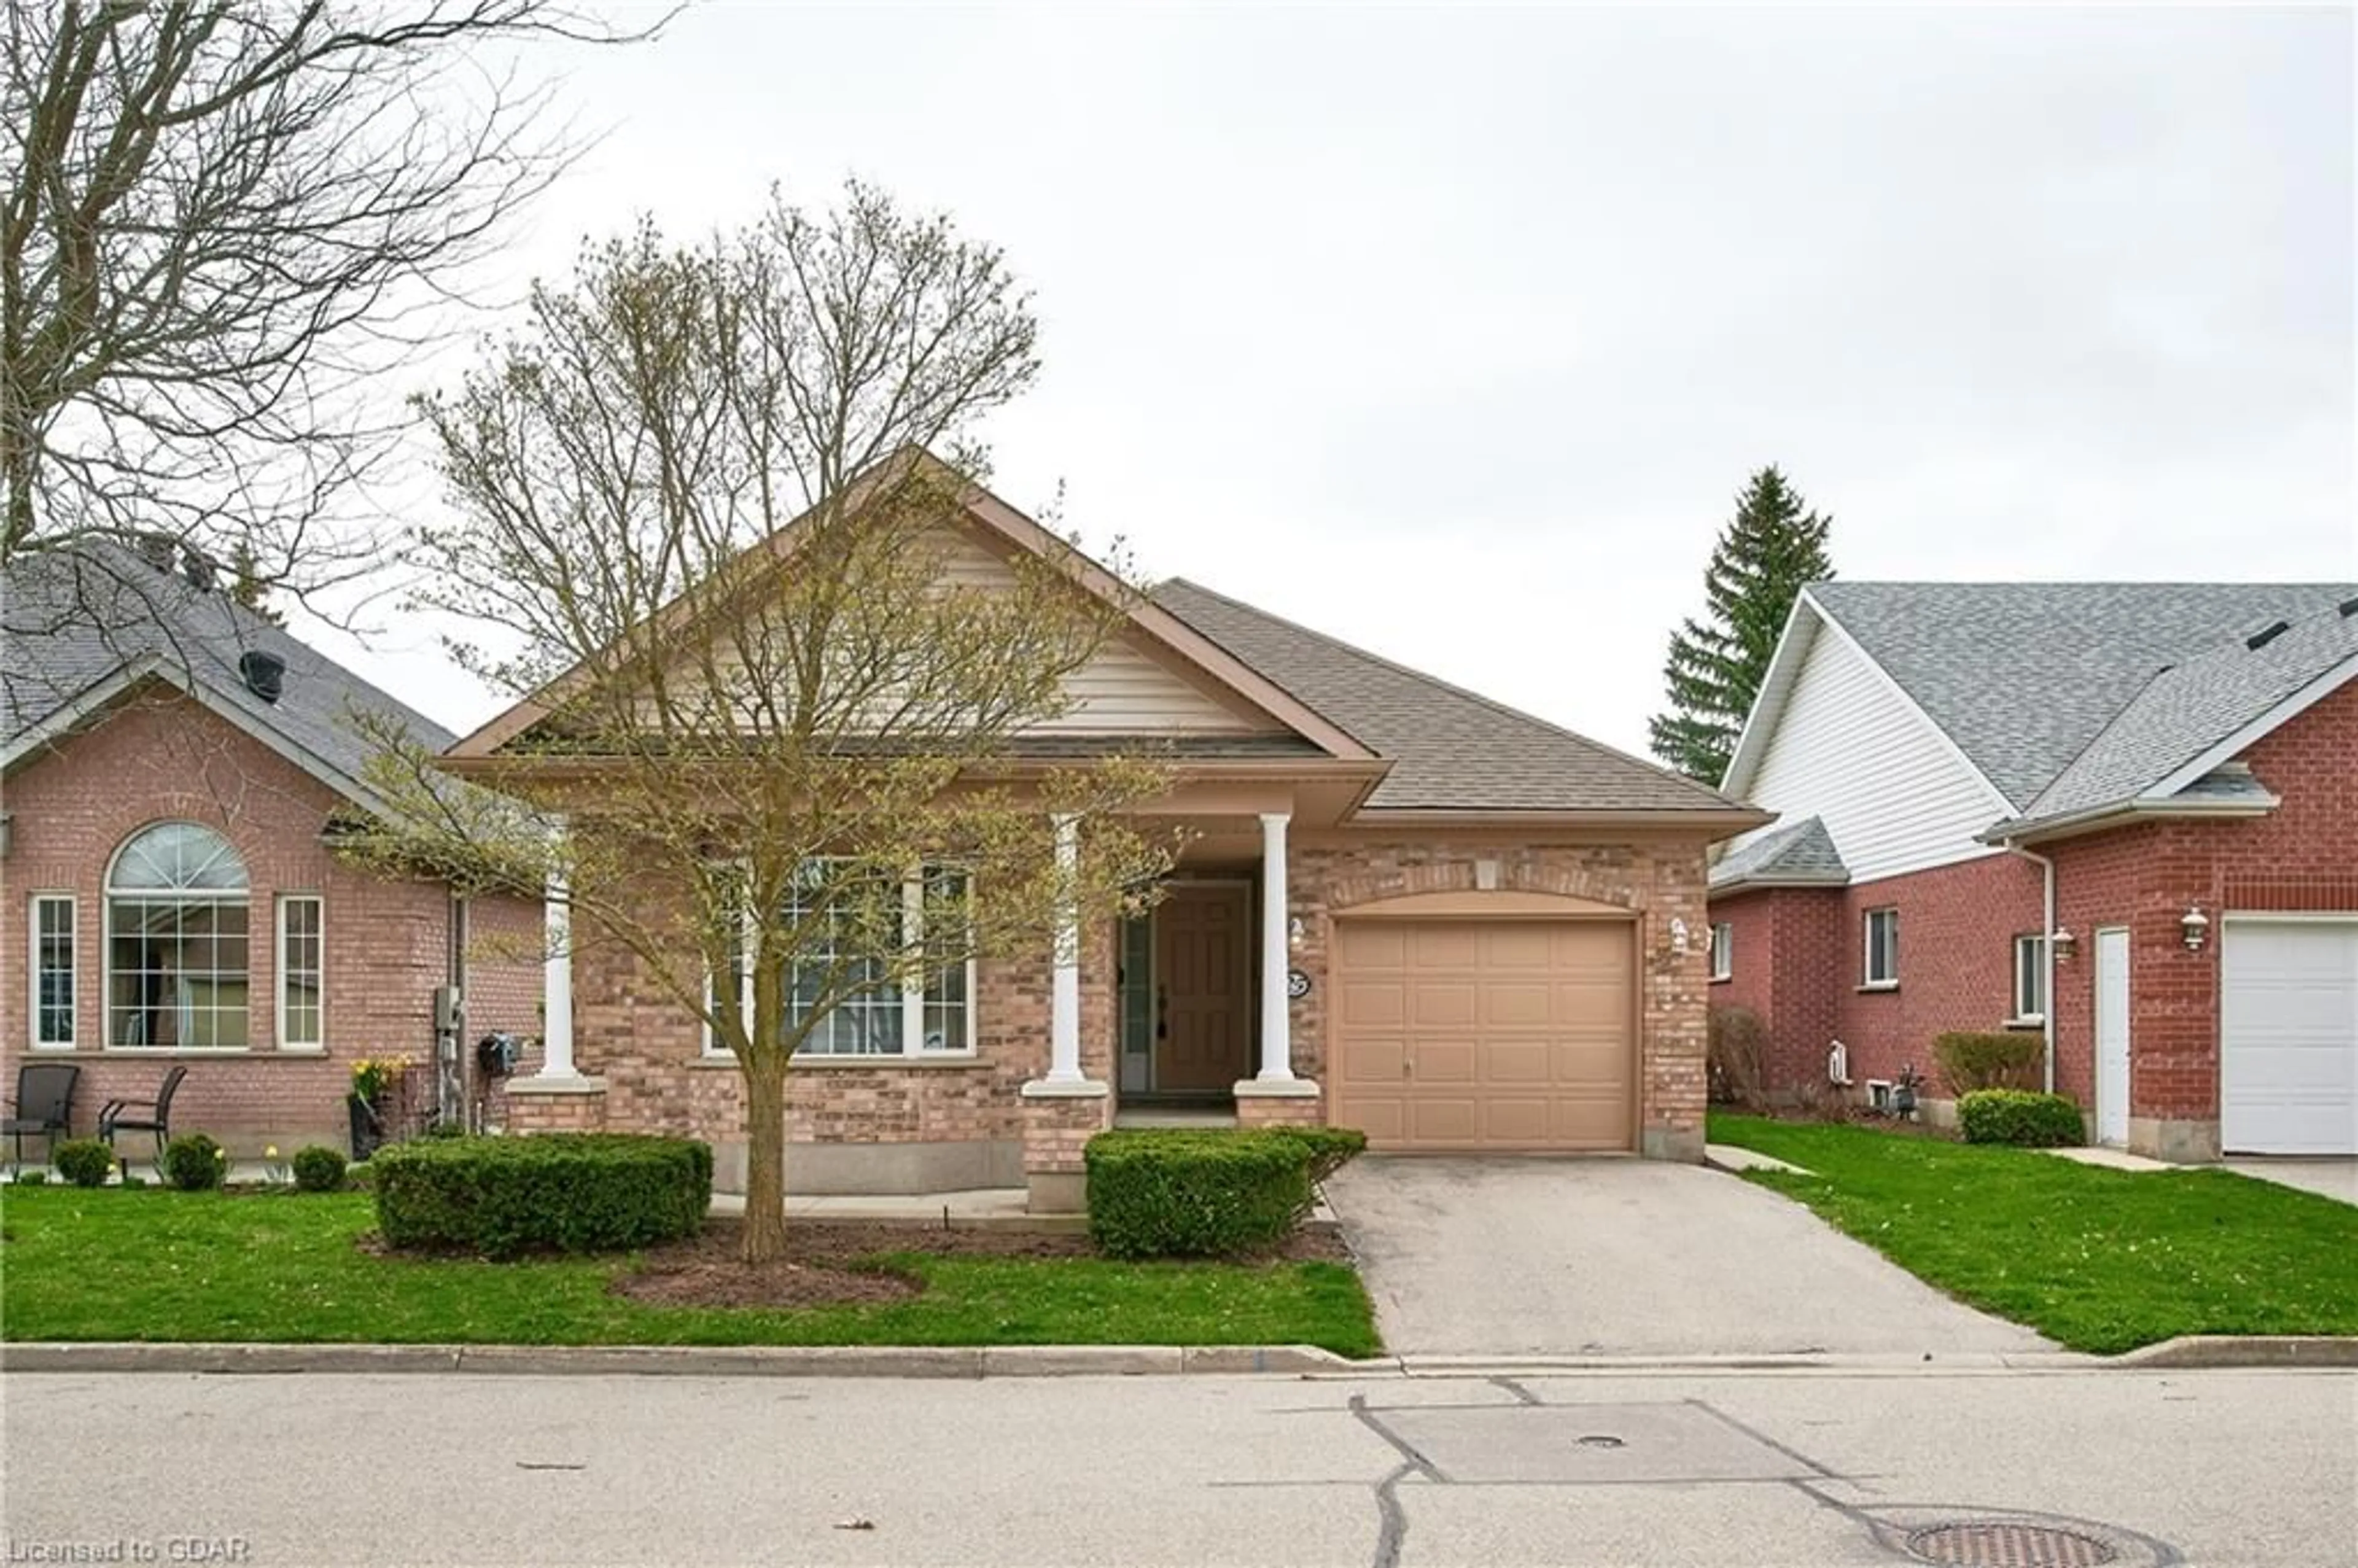 Home with brick exterior material for 25 Cherry Blossom Cir, Guelph Ontario N1G 4X7